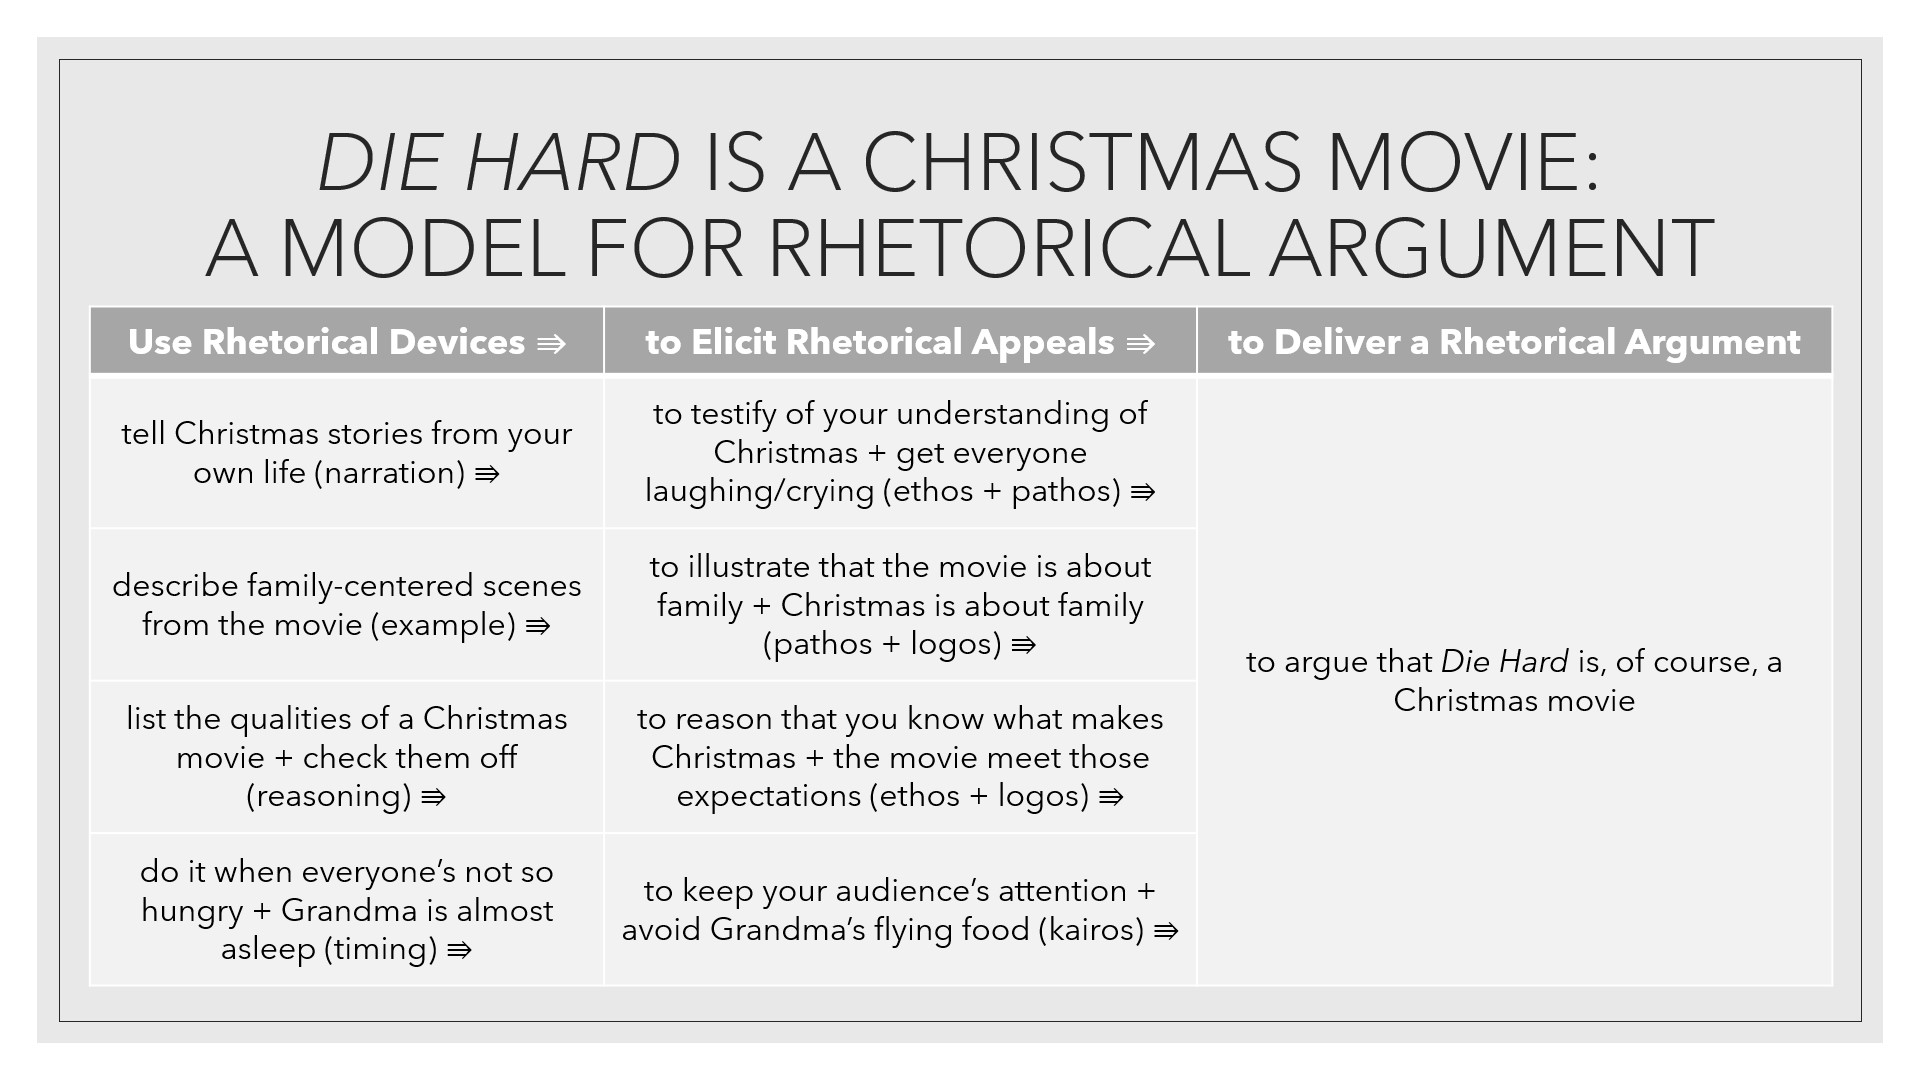 Die Hard is a Christmas movie as a model for rhetorical argument: tell your own Christmas stories (narration) to testify of your understanding of Christmas + get everyone laughing/crying (ethos + pathos), describe family-centered scenes from the movie to illustrate that it's about family + Christmas is about family (pathos + logos), list qualities of a Christmas movie to reason the movie meets those expectations (logos)